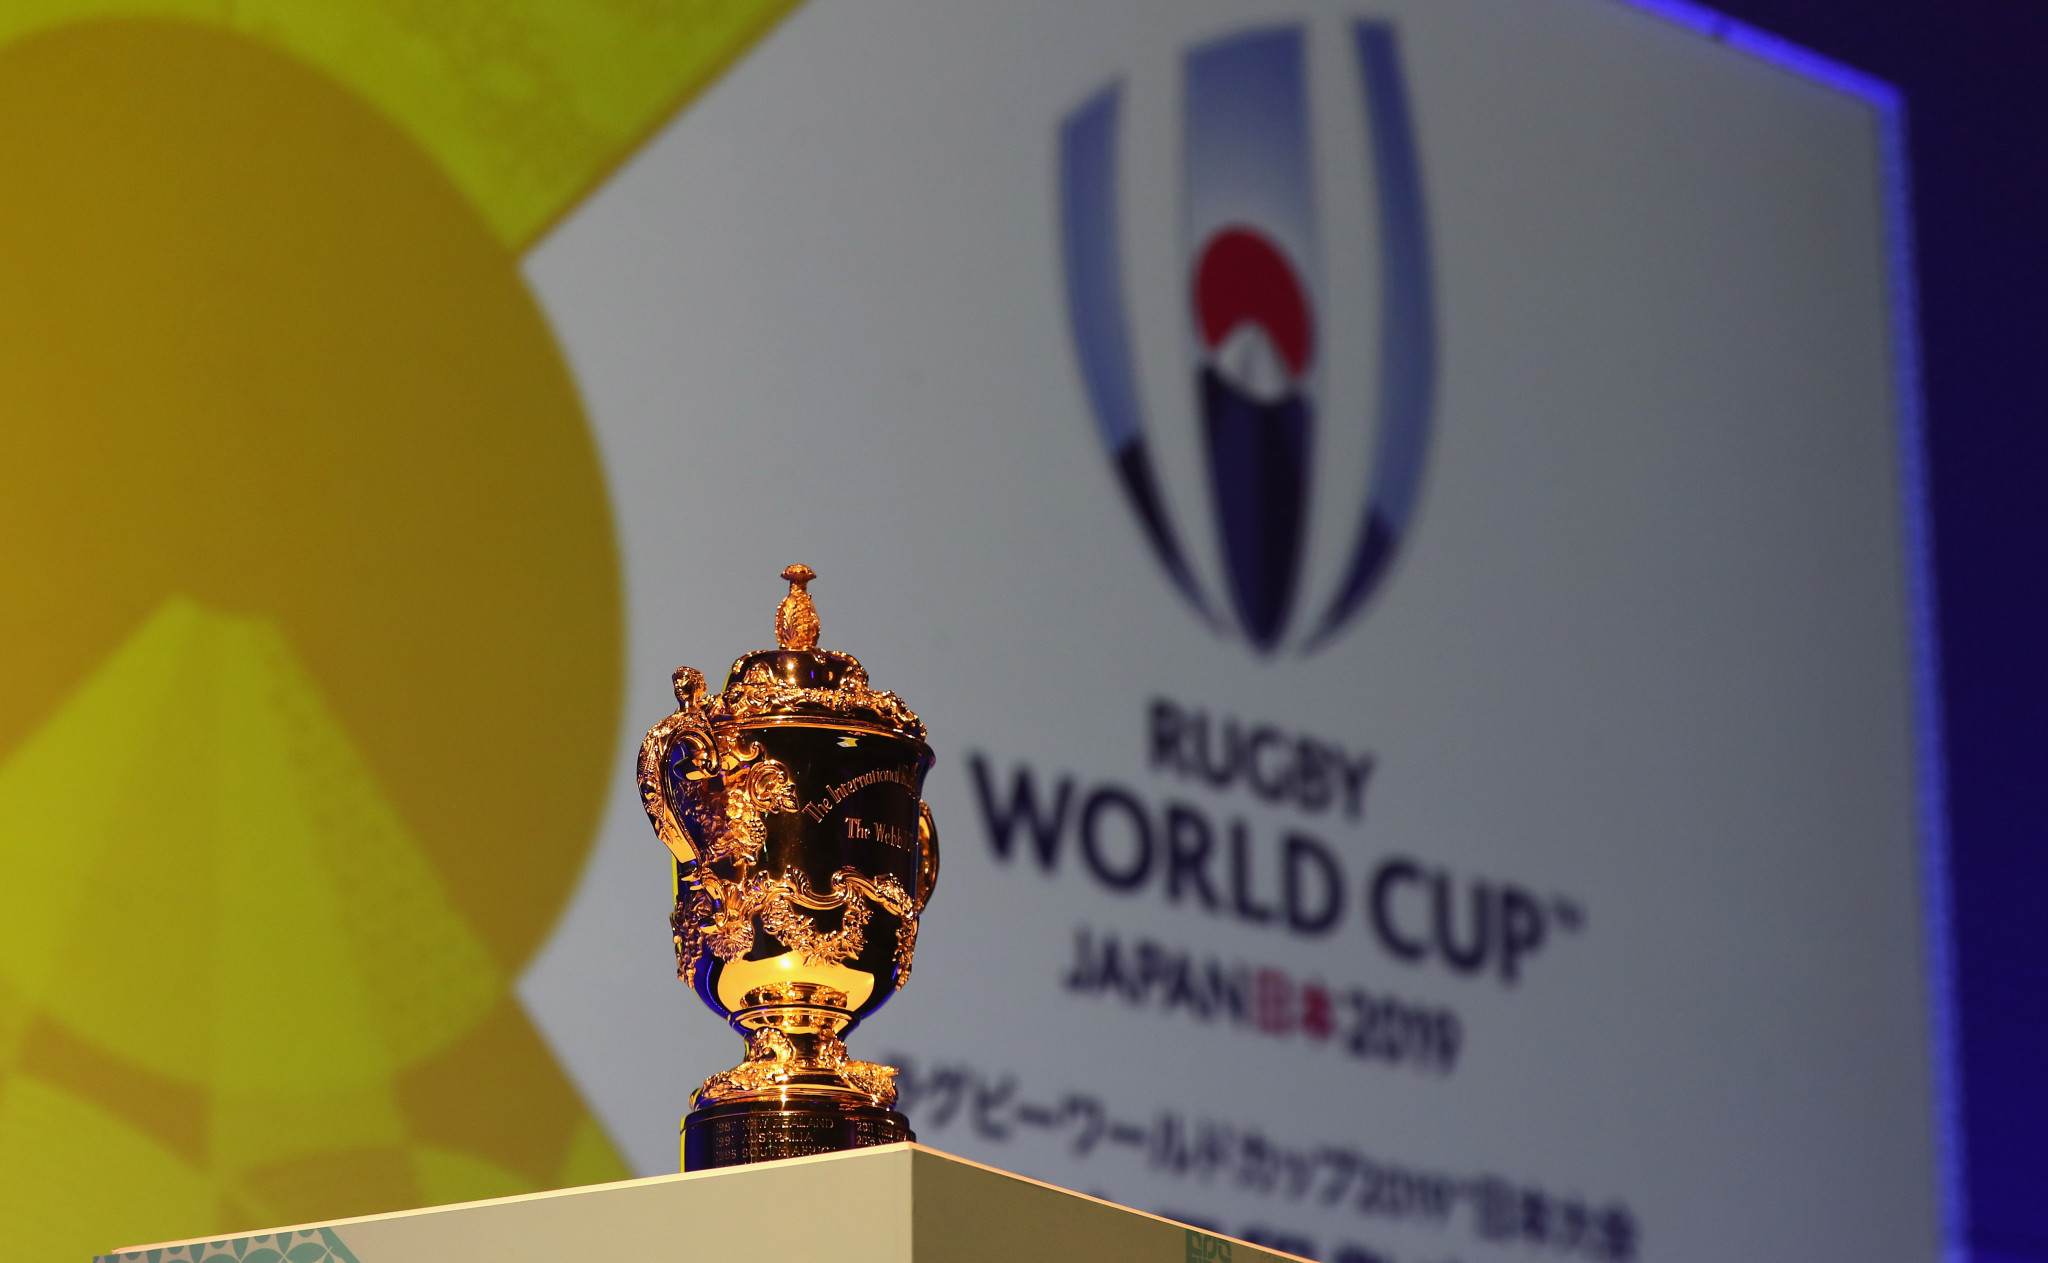 There has been record ticket demand for the Rugby World Cup 2019 which will be held in Japan ©World Rugby